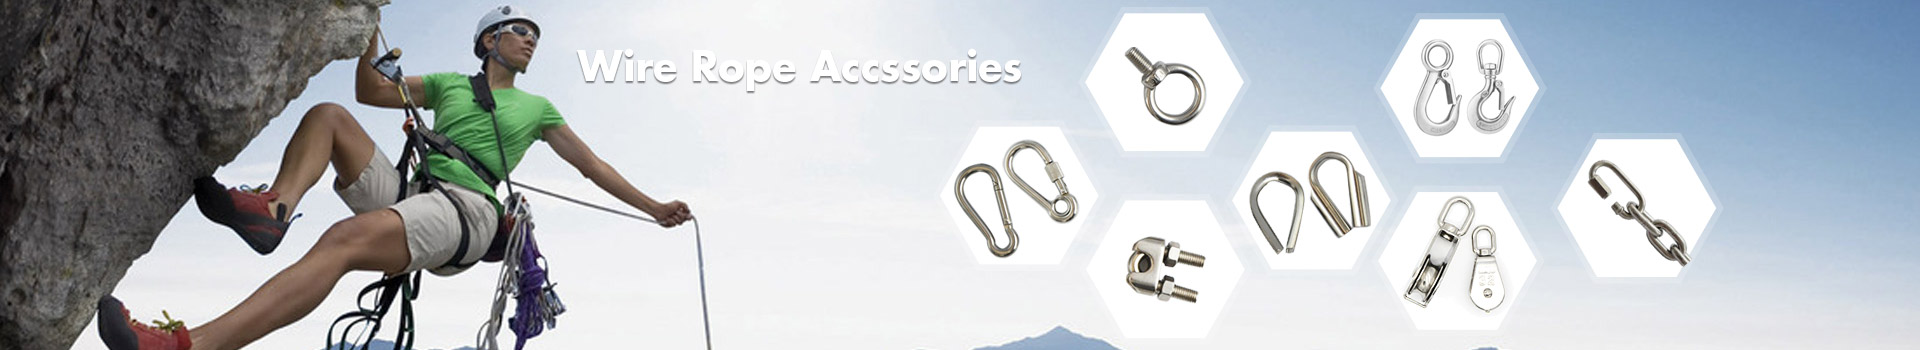 Wire Rope Accssories